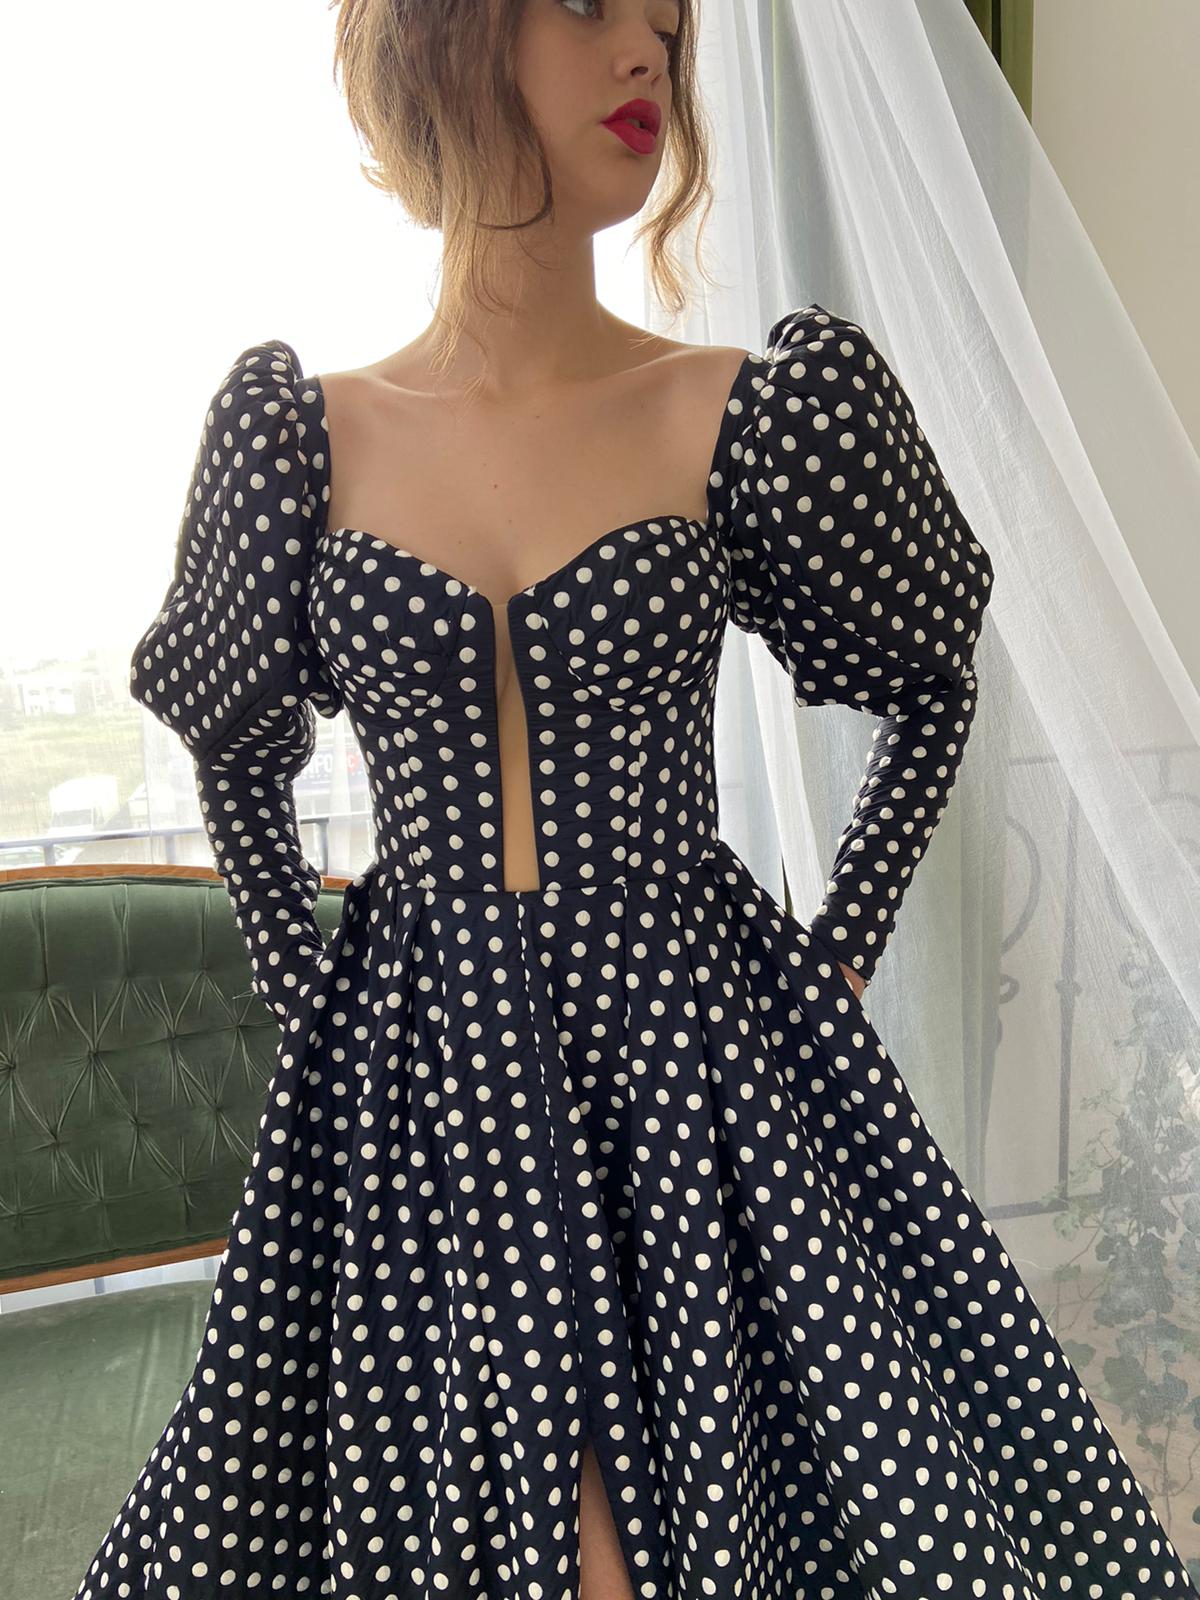 Rosa Polka Dots Gown